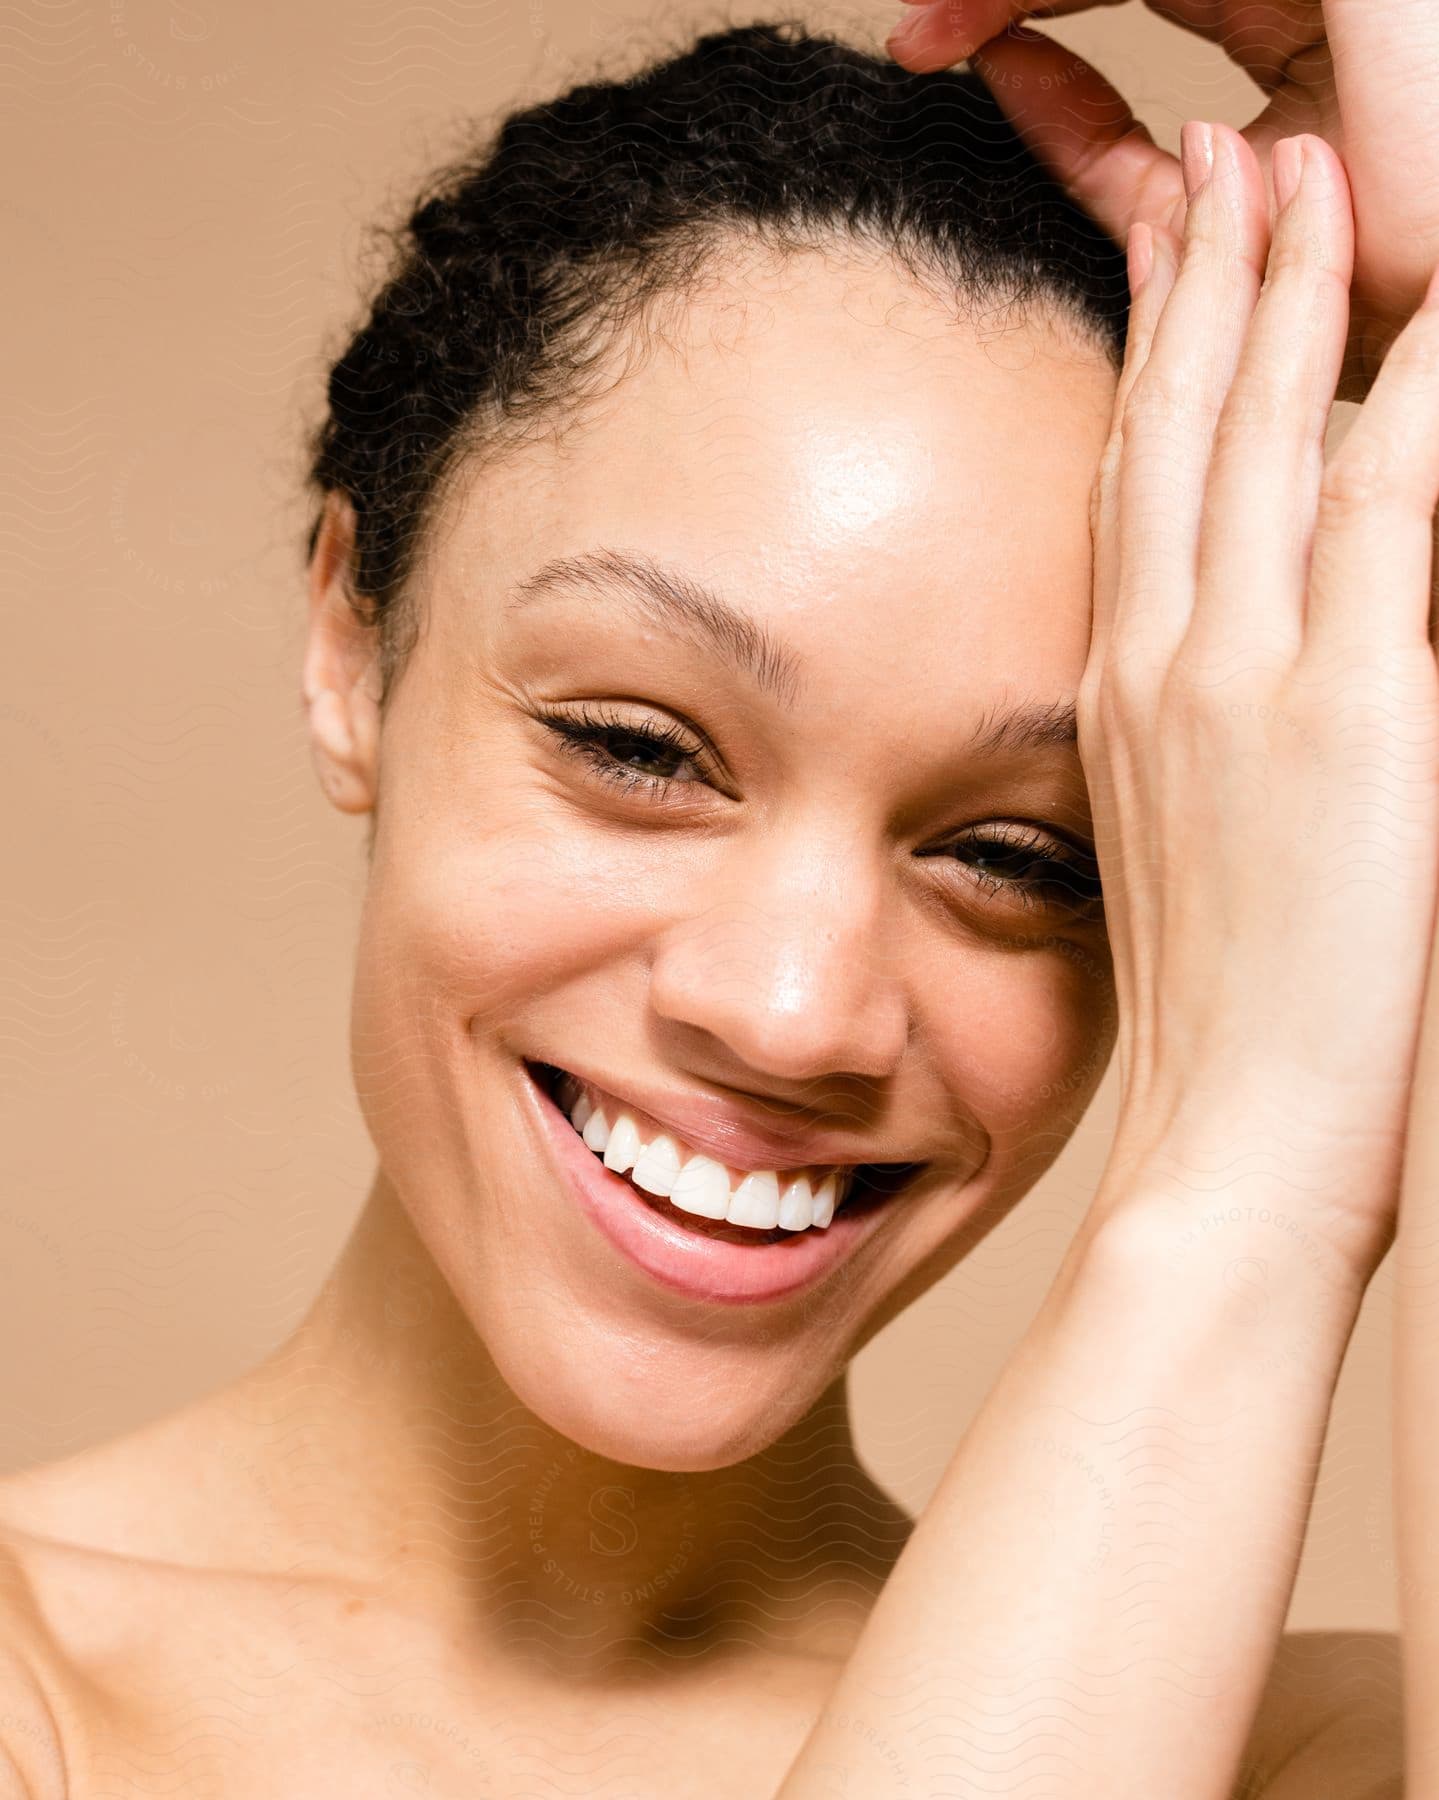 Woman with a big smile on her face and her hands on the side of her forehead